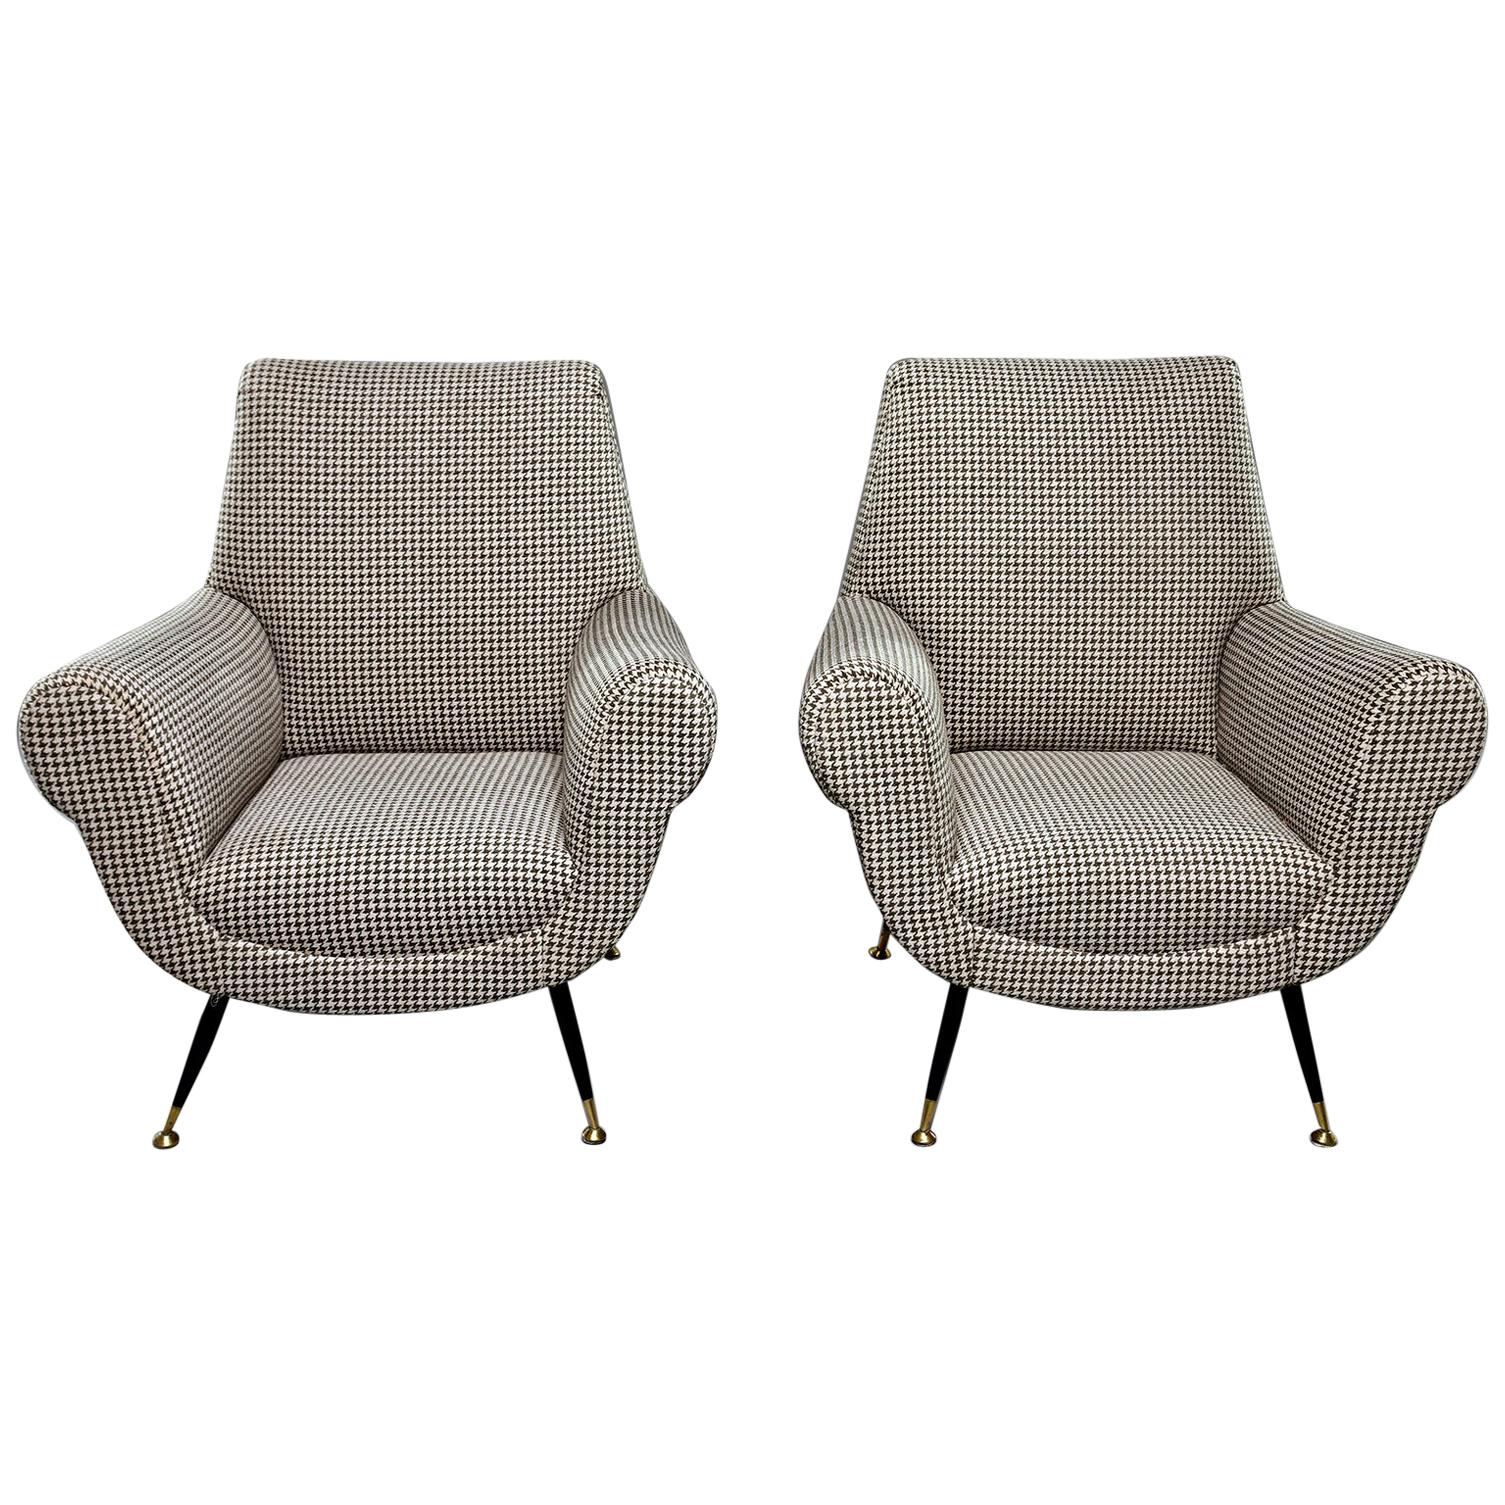 Pair of Newly Upholstered Chairs by Gigi Radice for Minotti